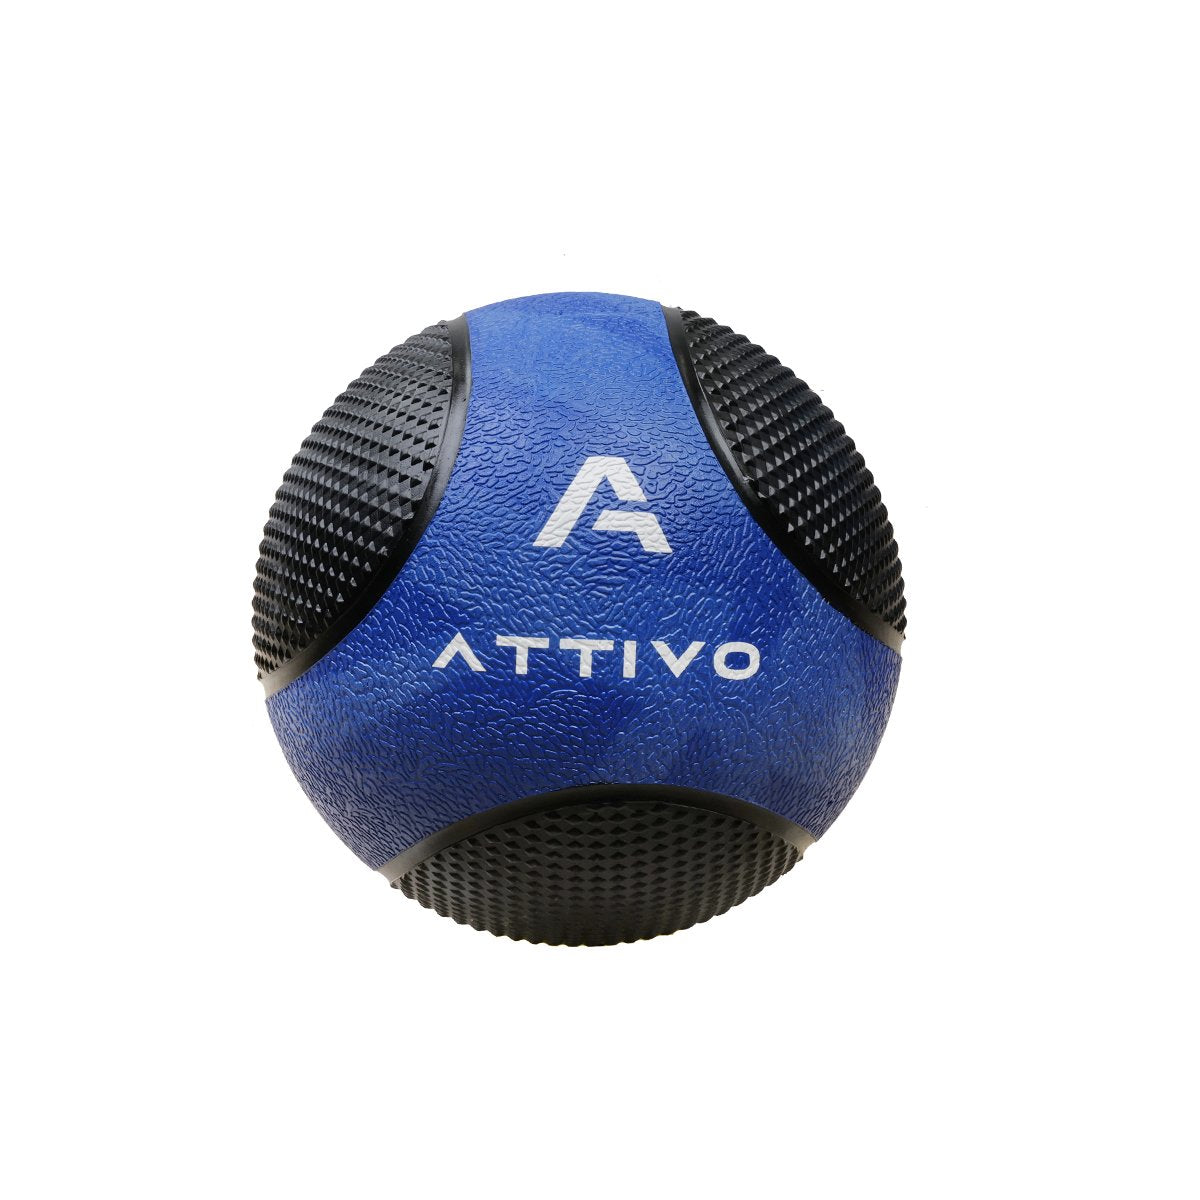 ATTIVO Medicine Ball for Workouts Exercise Balance Training - 10KG